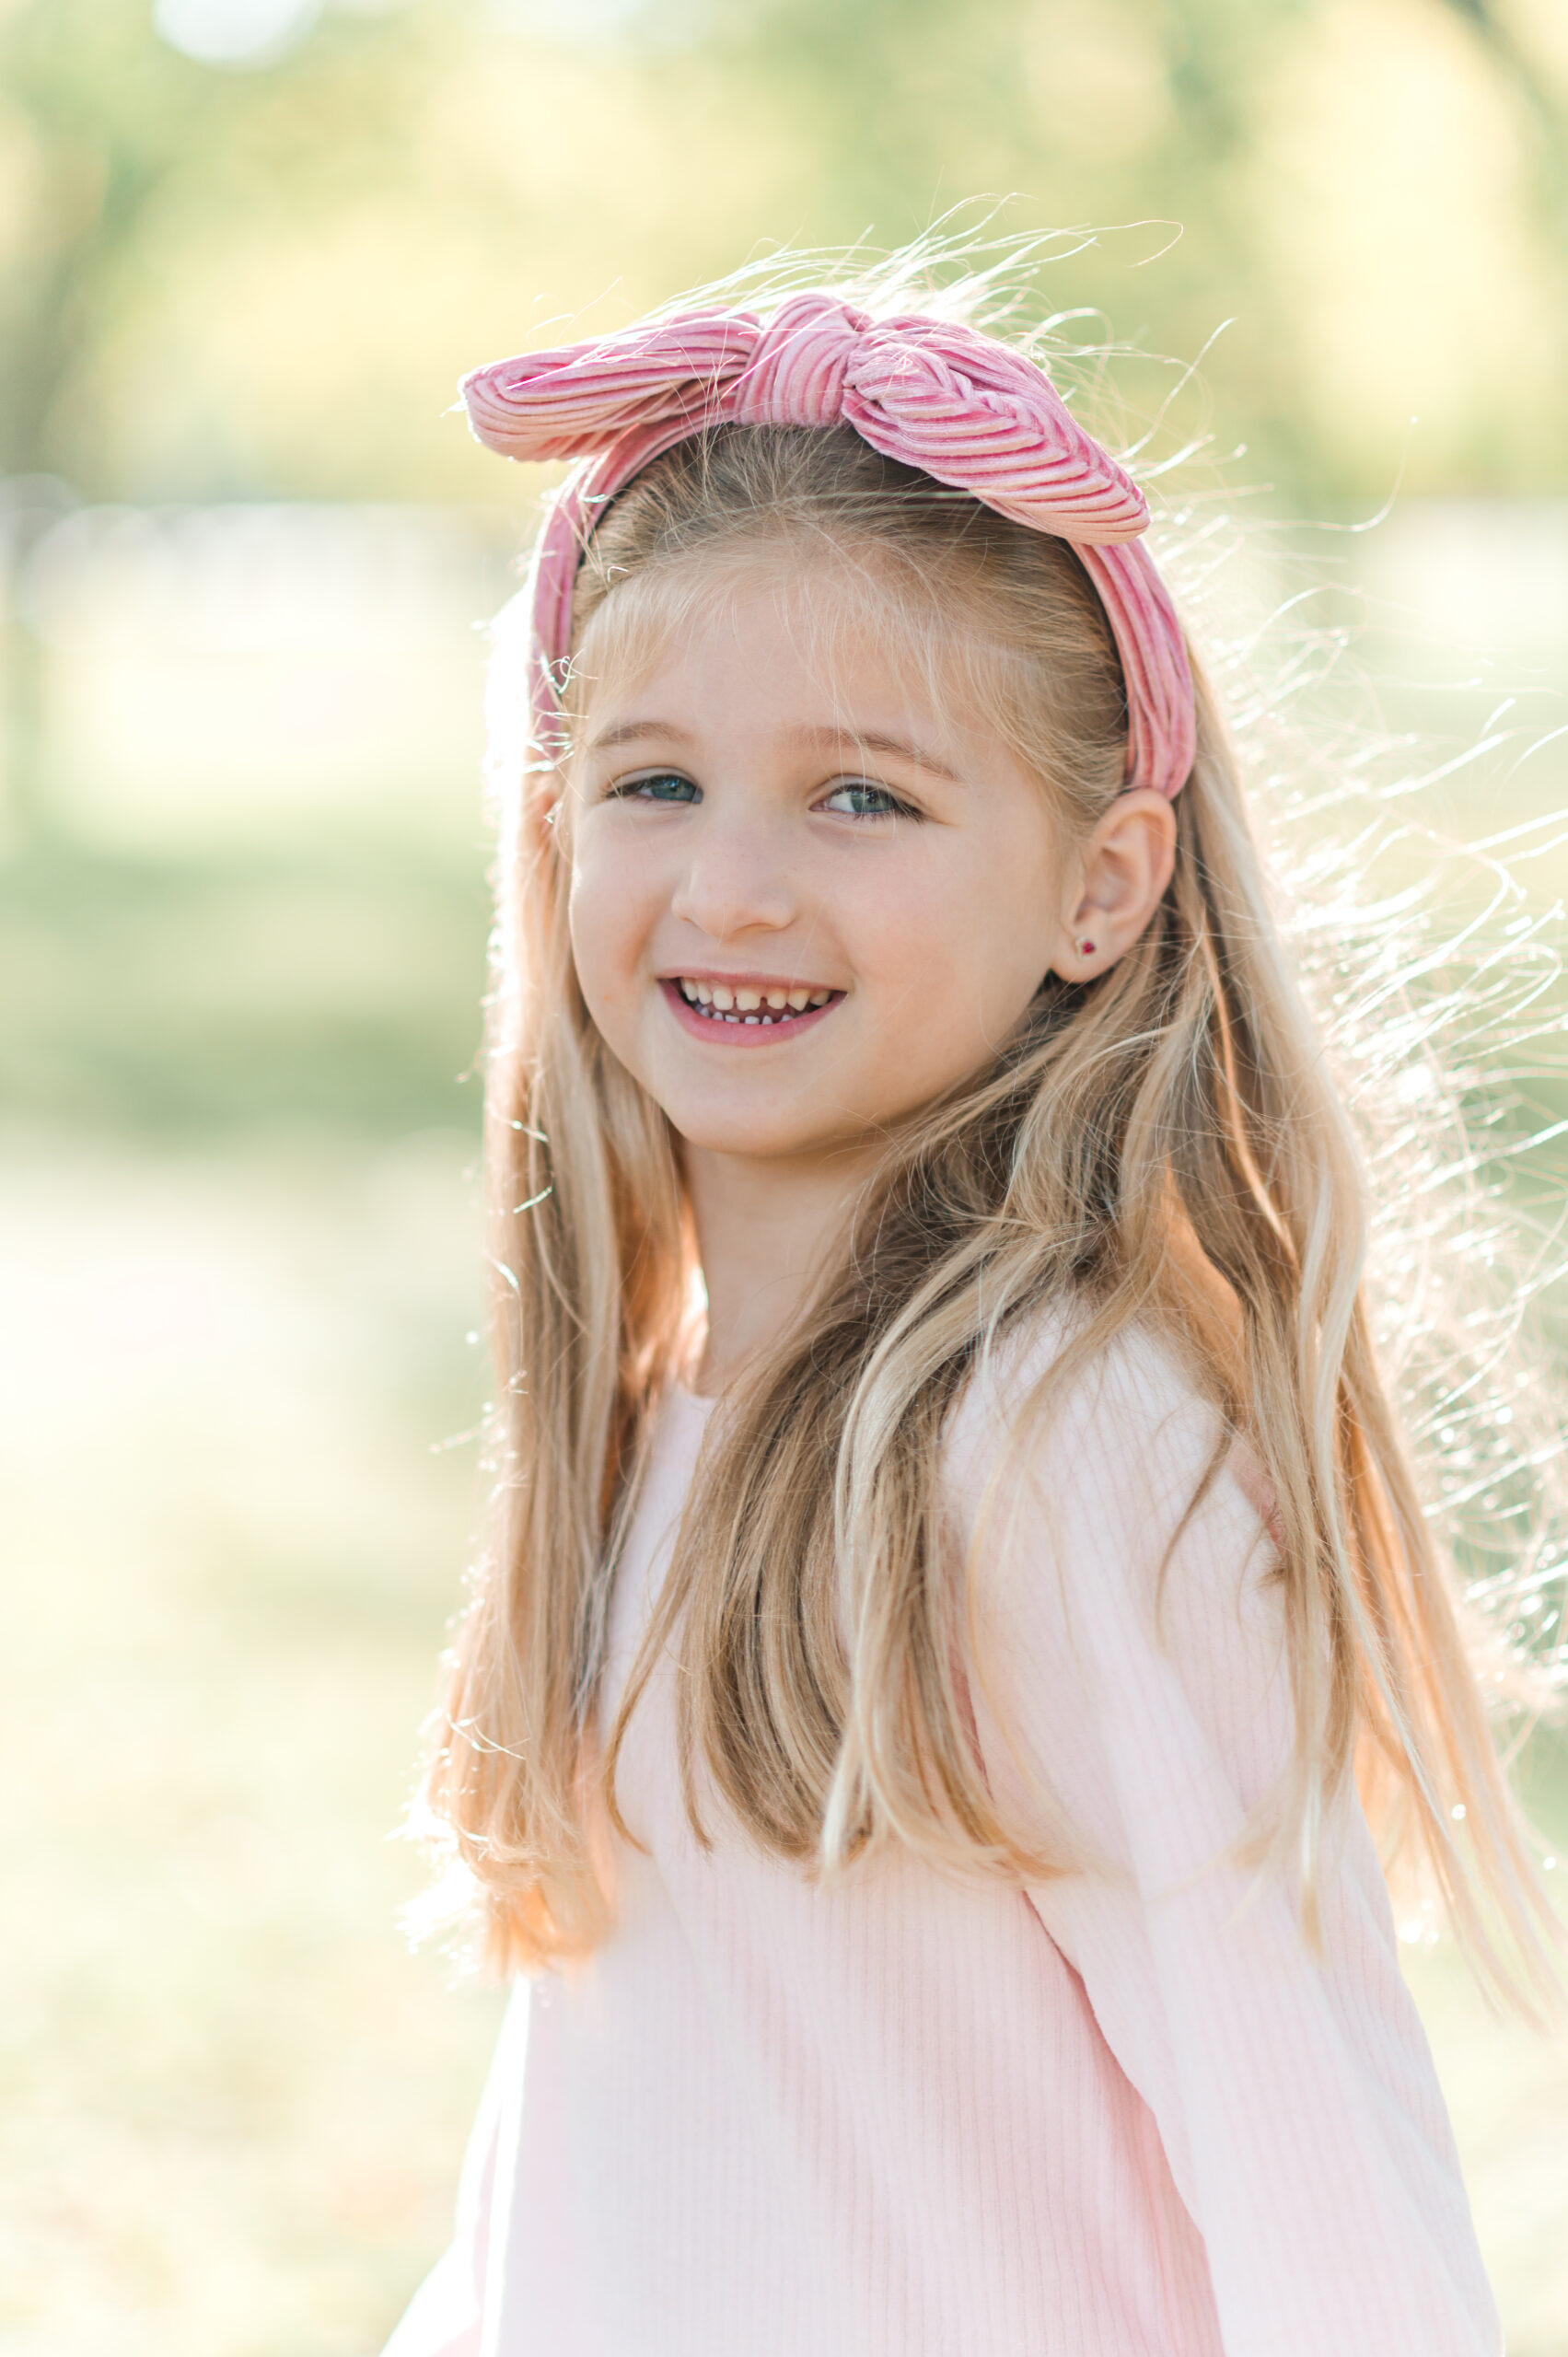 Girl with long blond hair smiling at a pro photographer in a park wearing a pink headband.